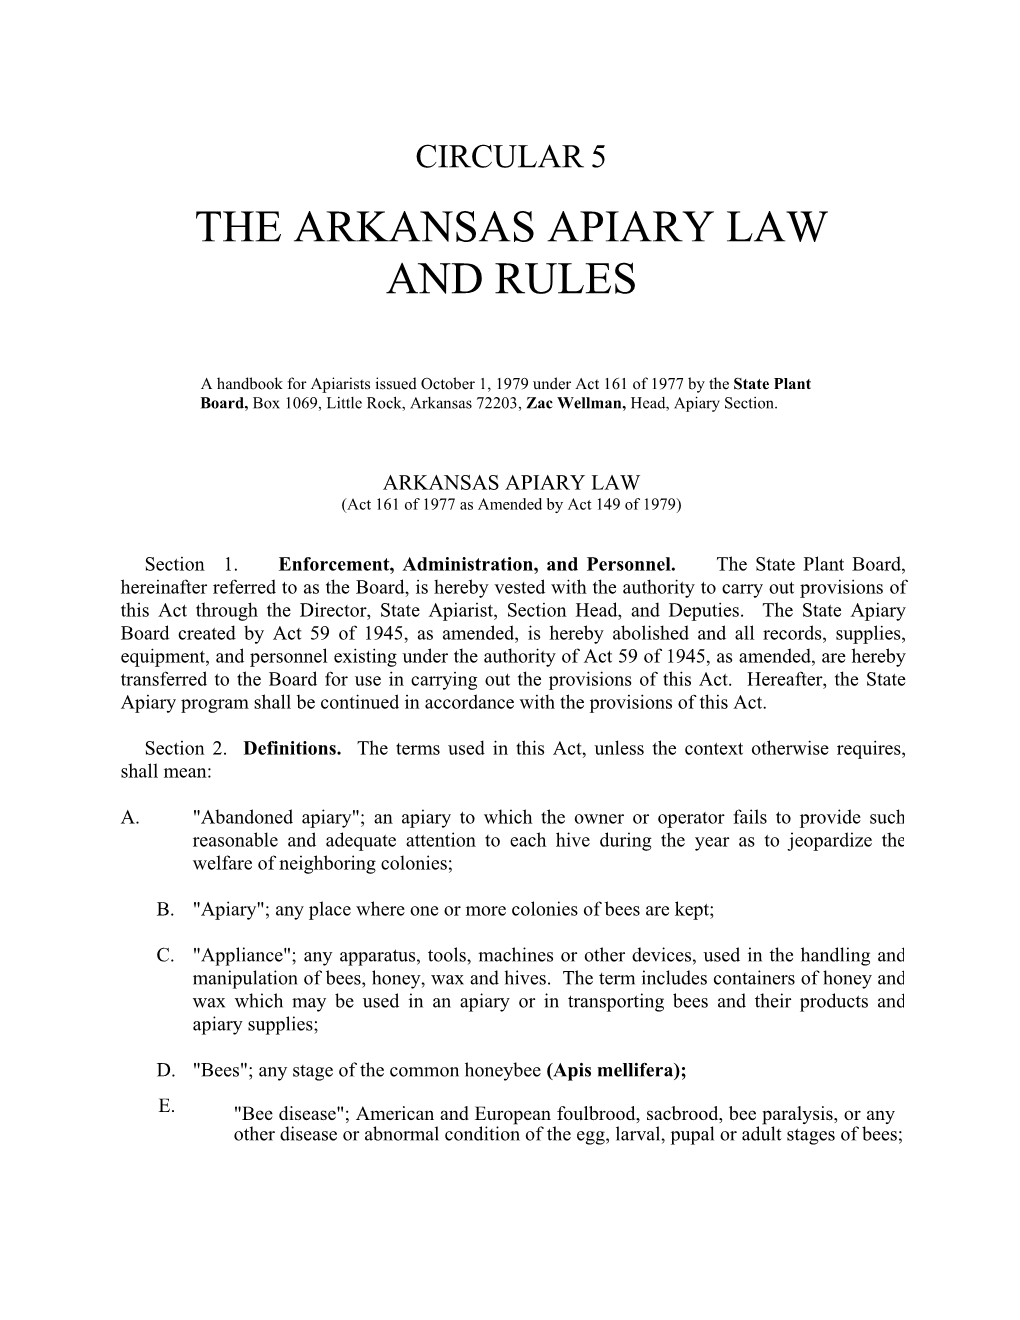 Apiary Law & Rules